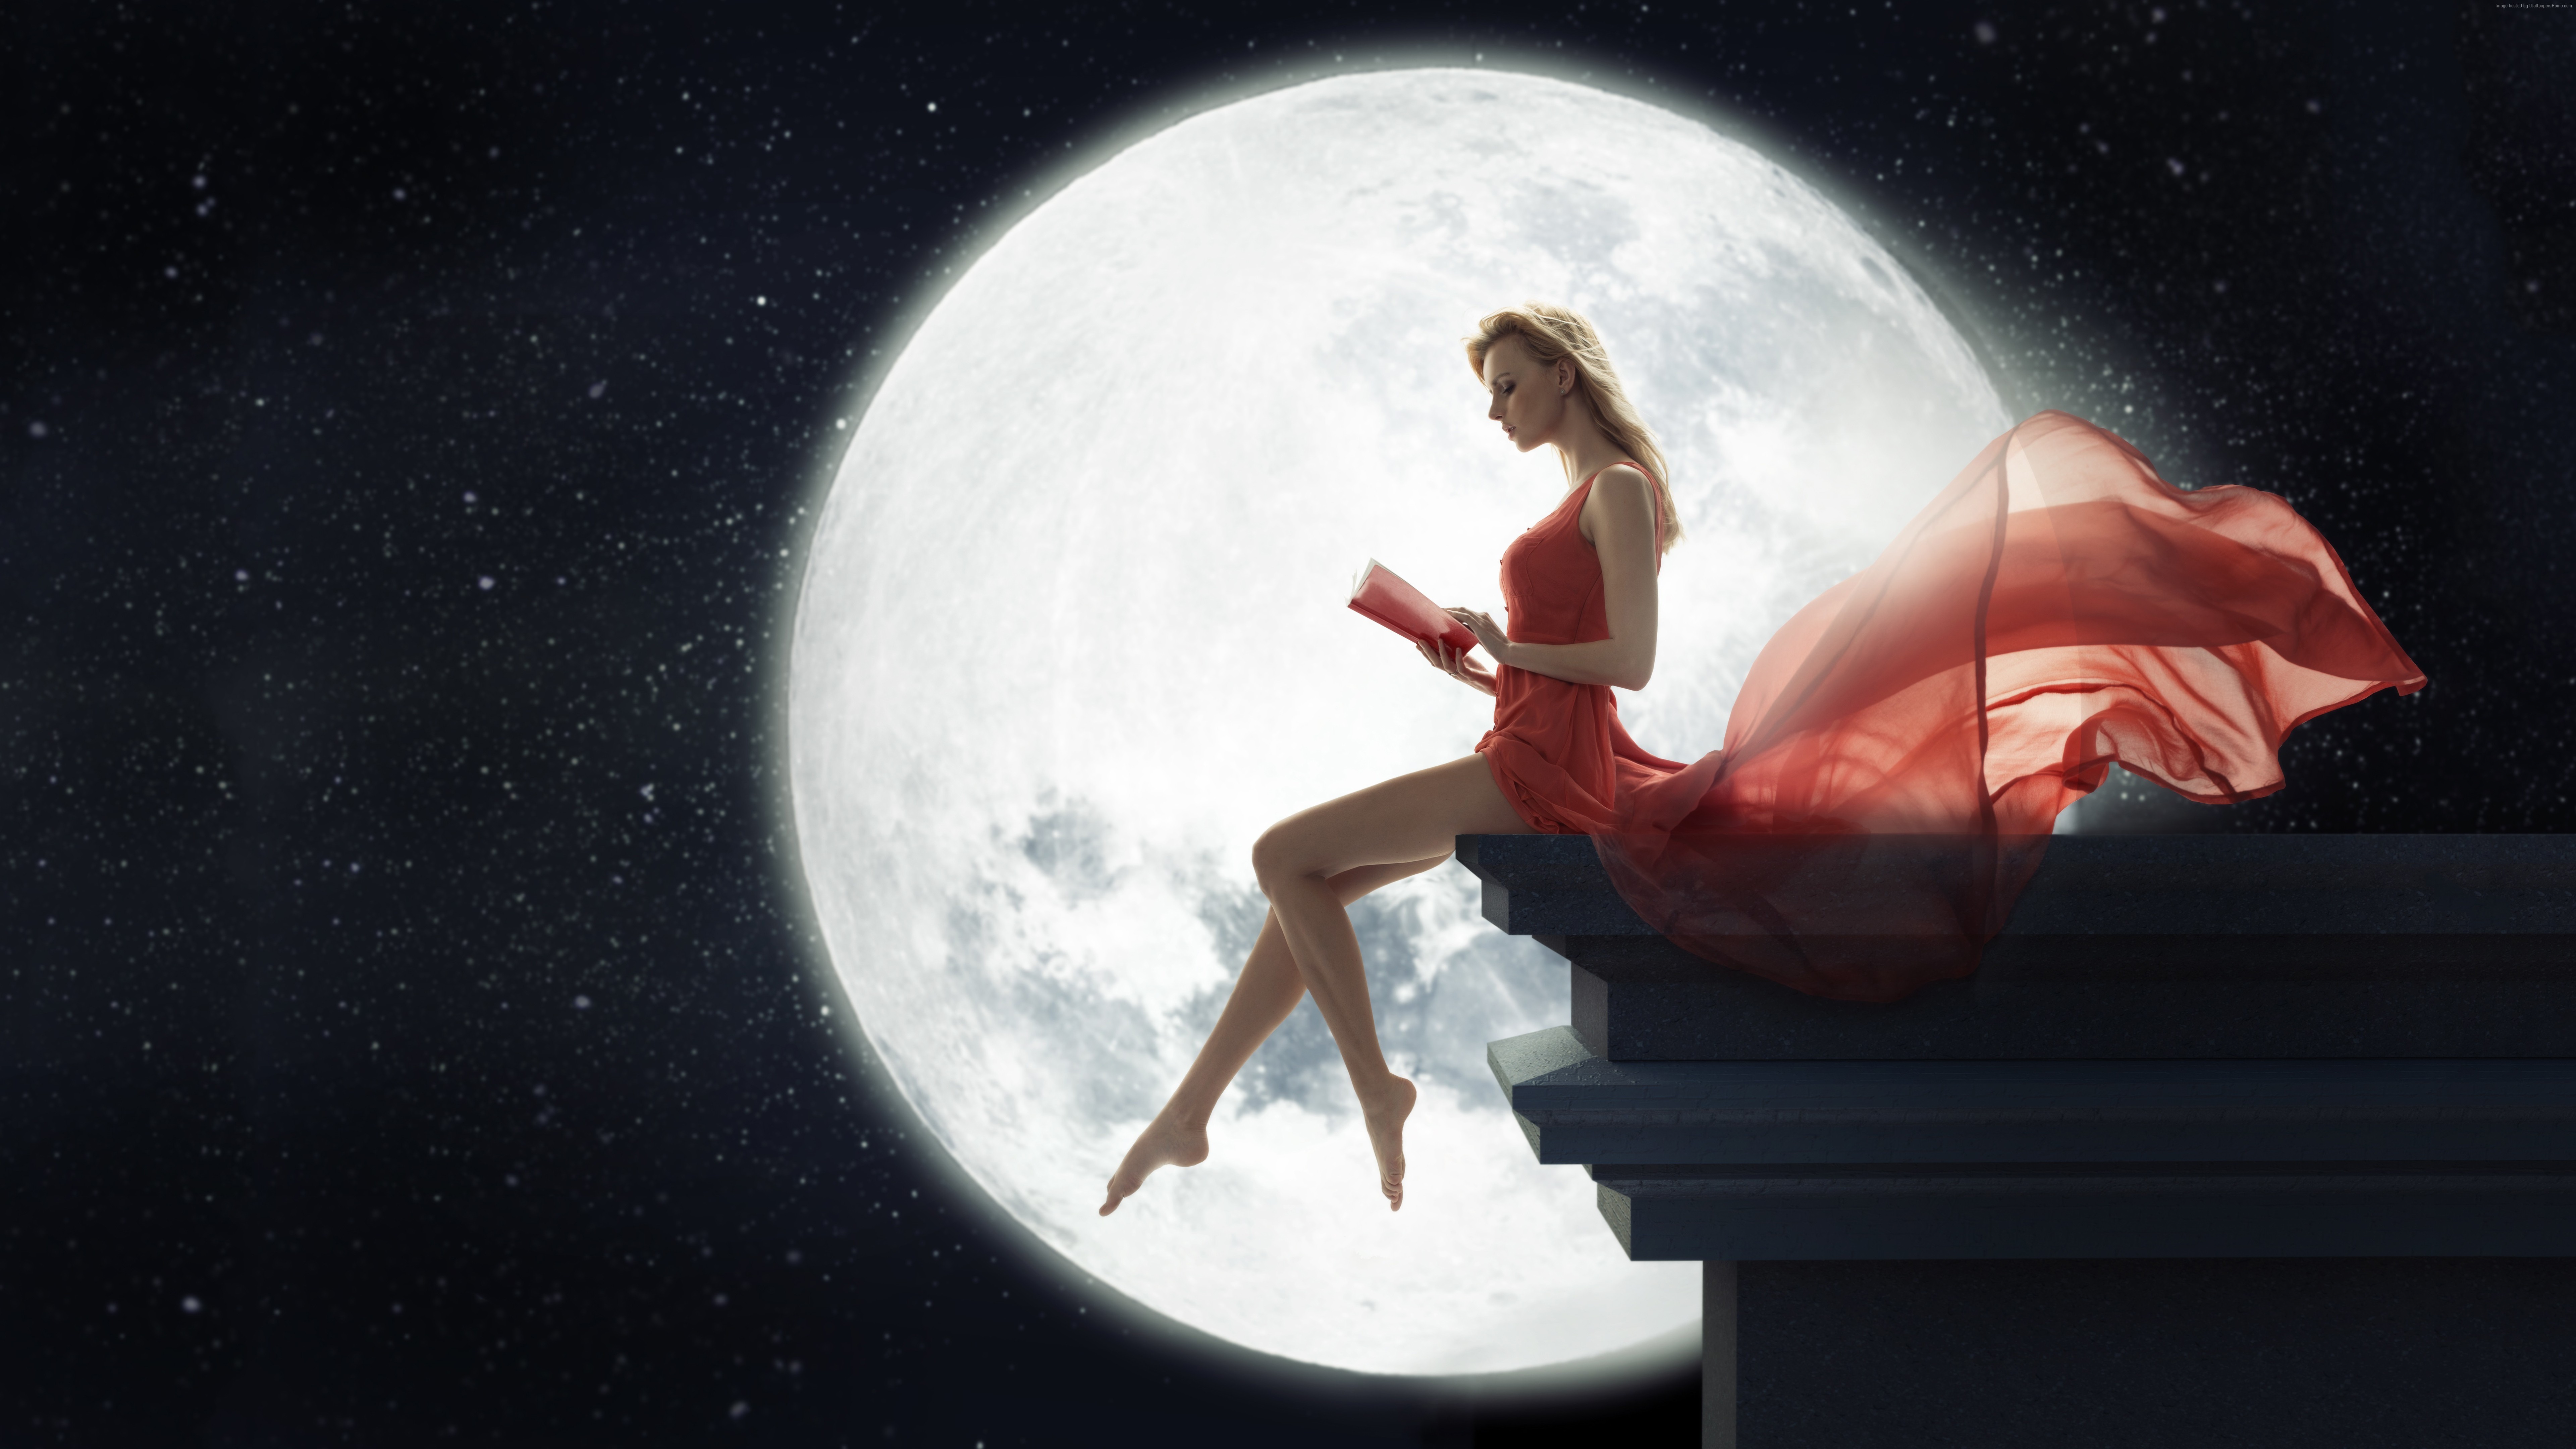 Woman Moon Book Gown Red Dress 7680x4320